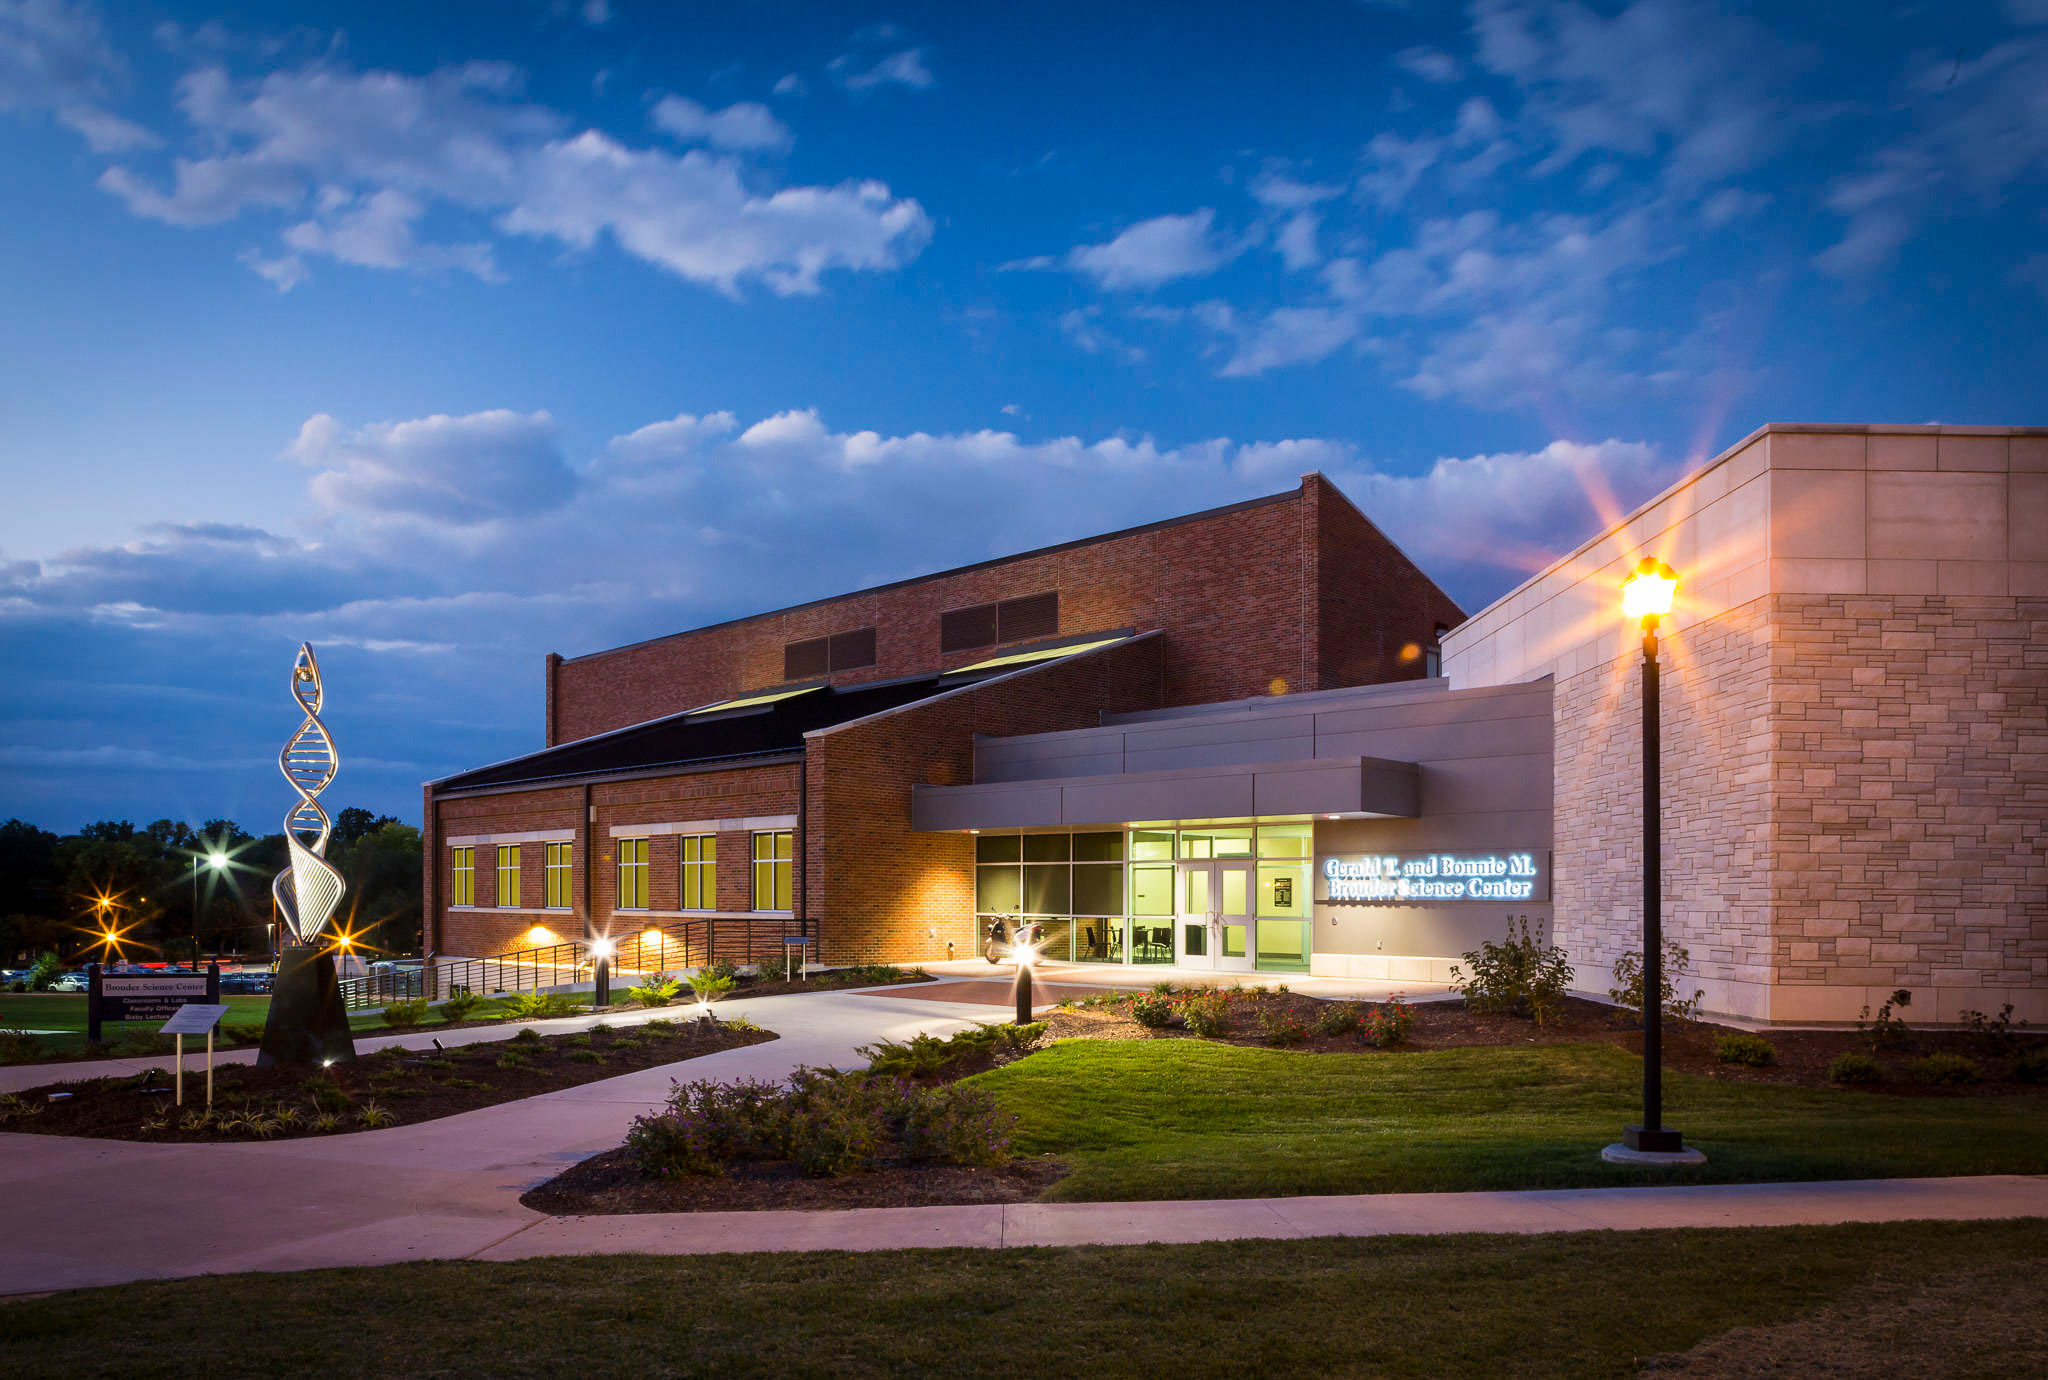 A photograph of the science building at twilight.